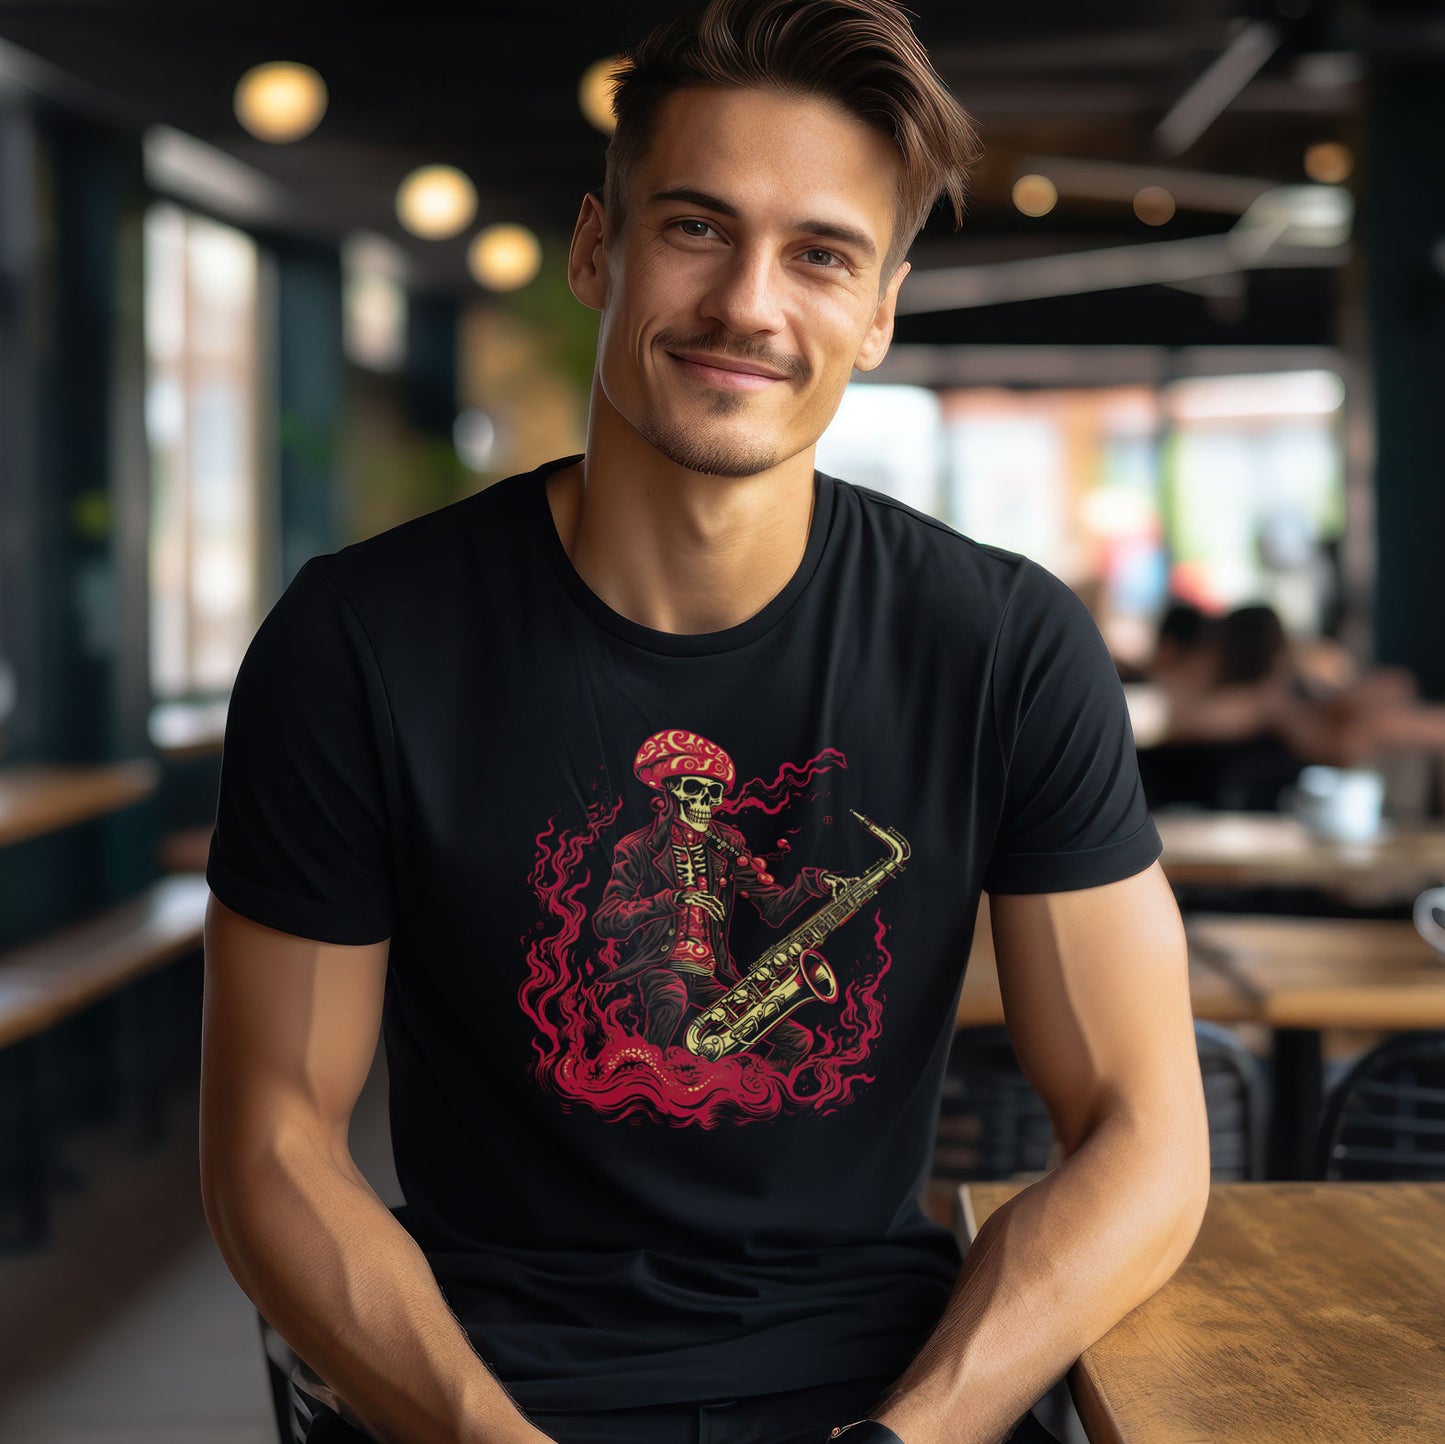 guy in a cafe wearing a black t-shirt with skeleton playing saxophone print